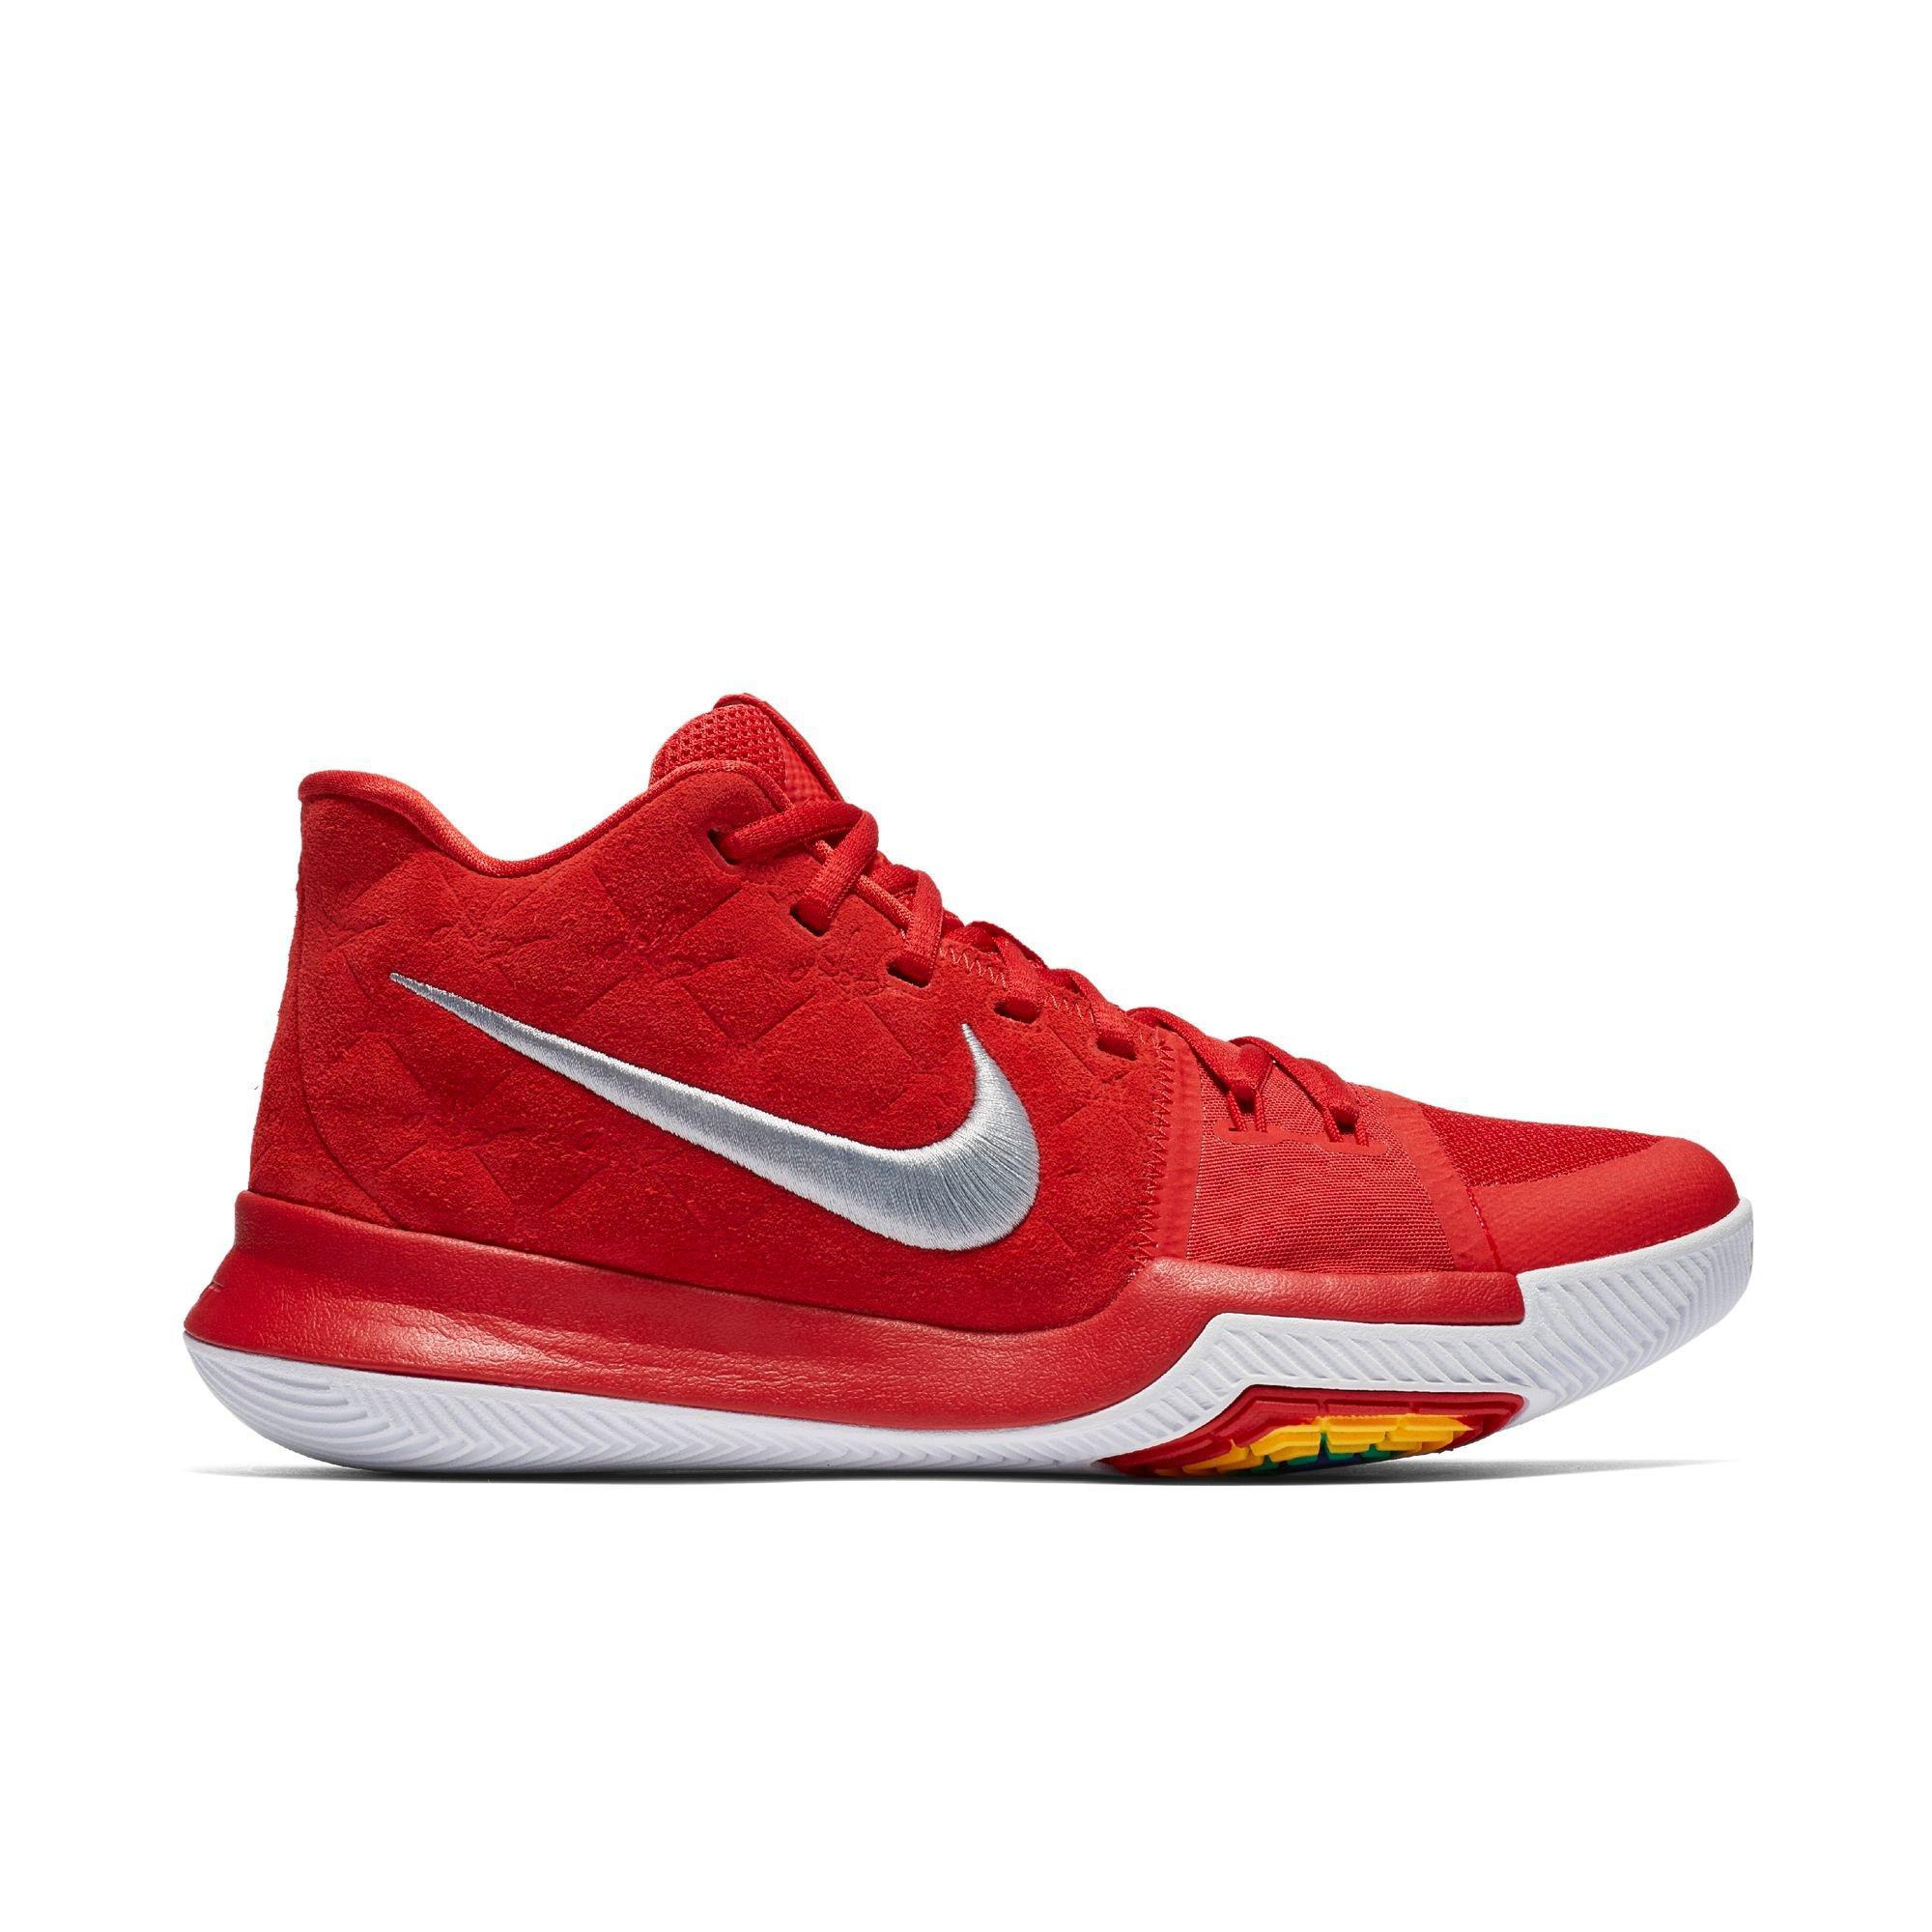 Free Shipping No Minimum. 5 out of 5 stars. Read reviews. (1). Nike Kyrie  ...